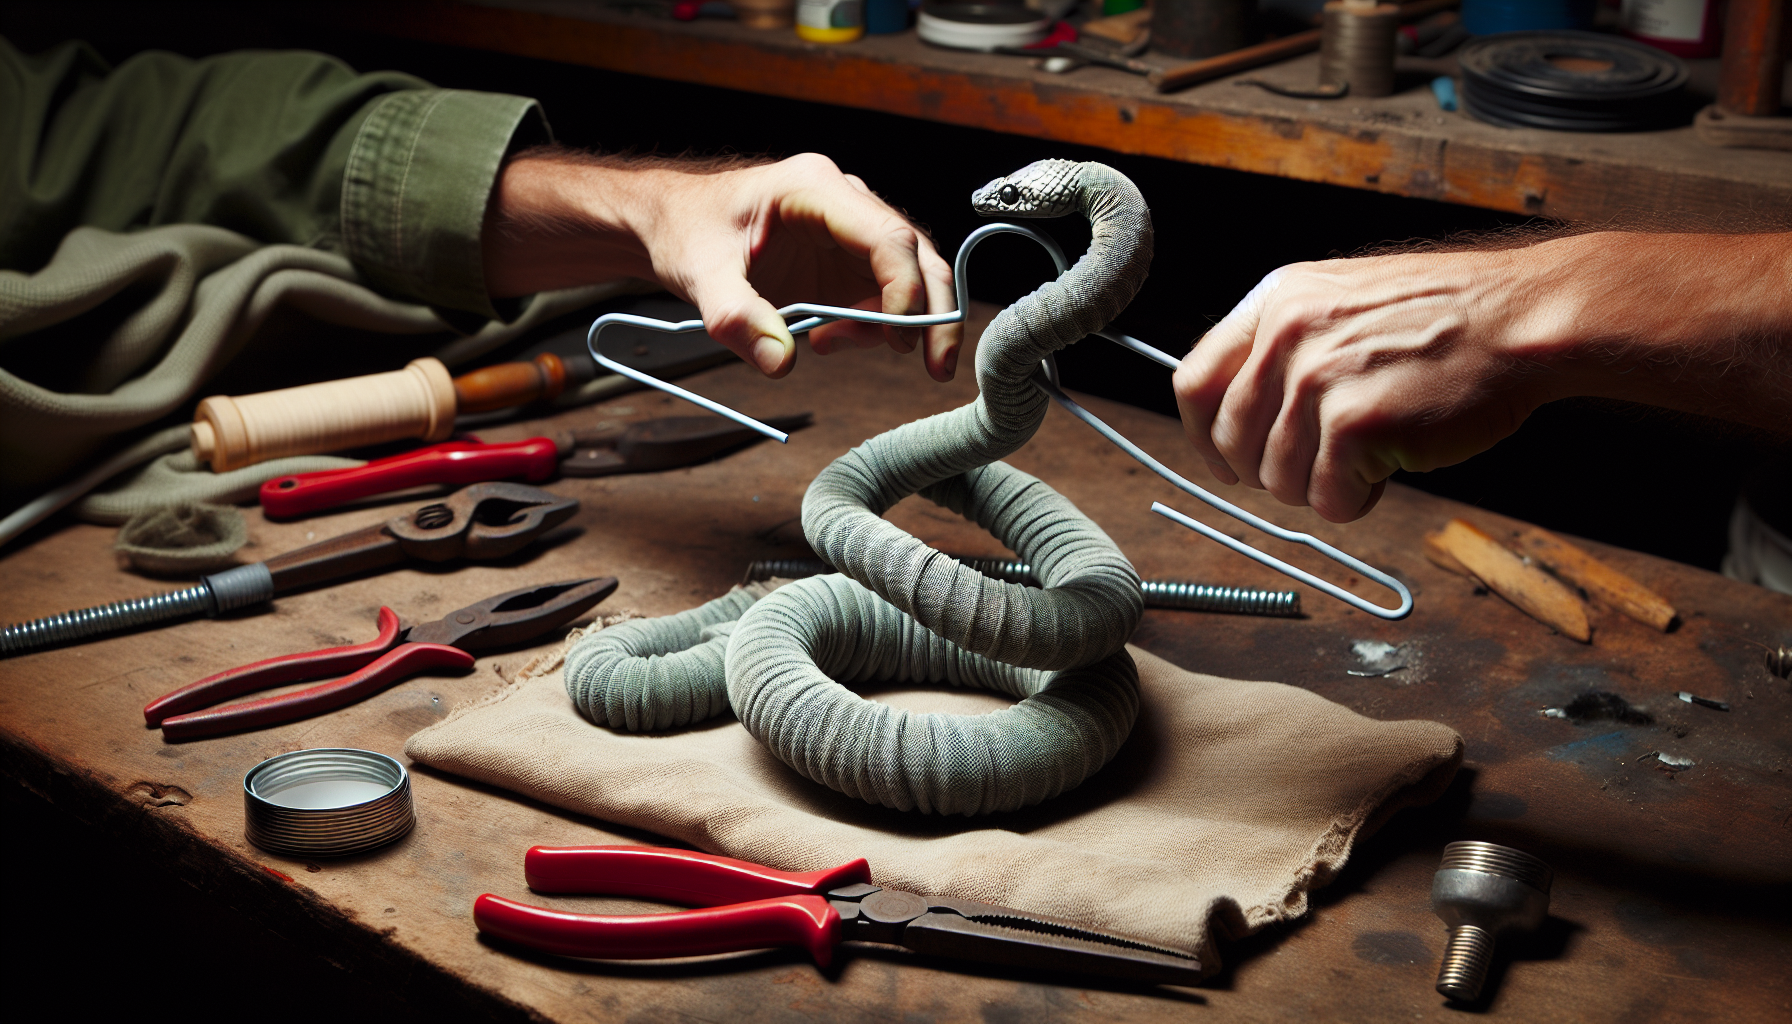 Homemade drain snake made from a wire coat hanger